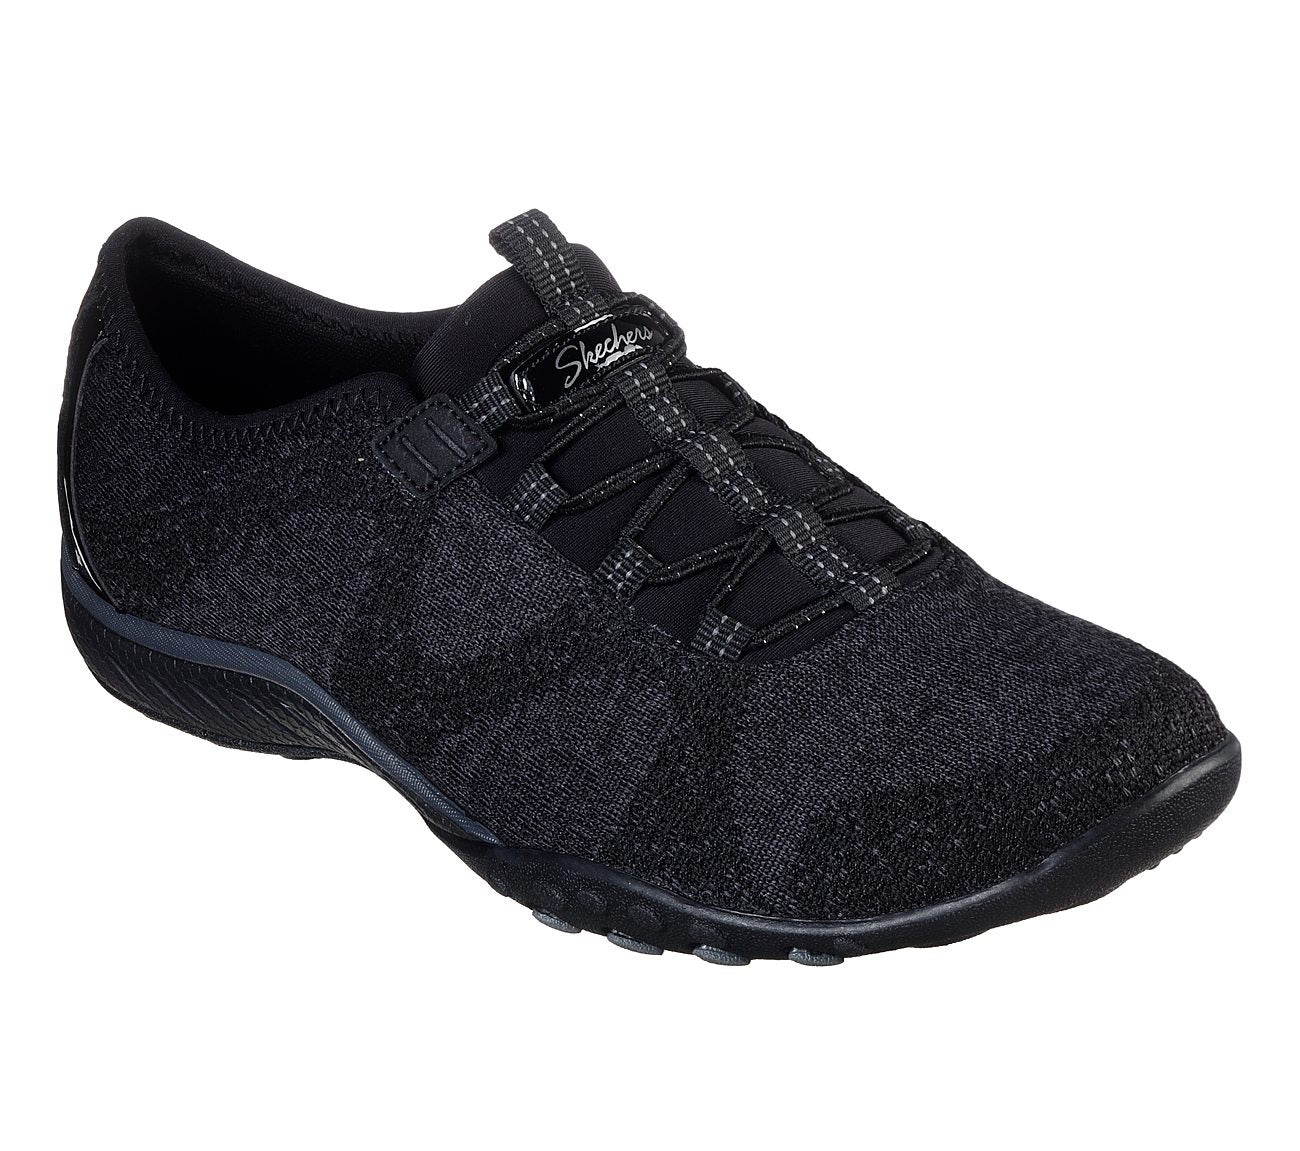 Skechers 23855 Breathe Easy Opportuknity Black Slip on Shoes - elevate your sole